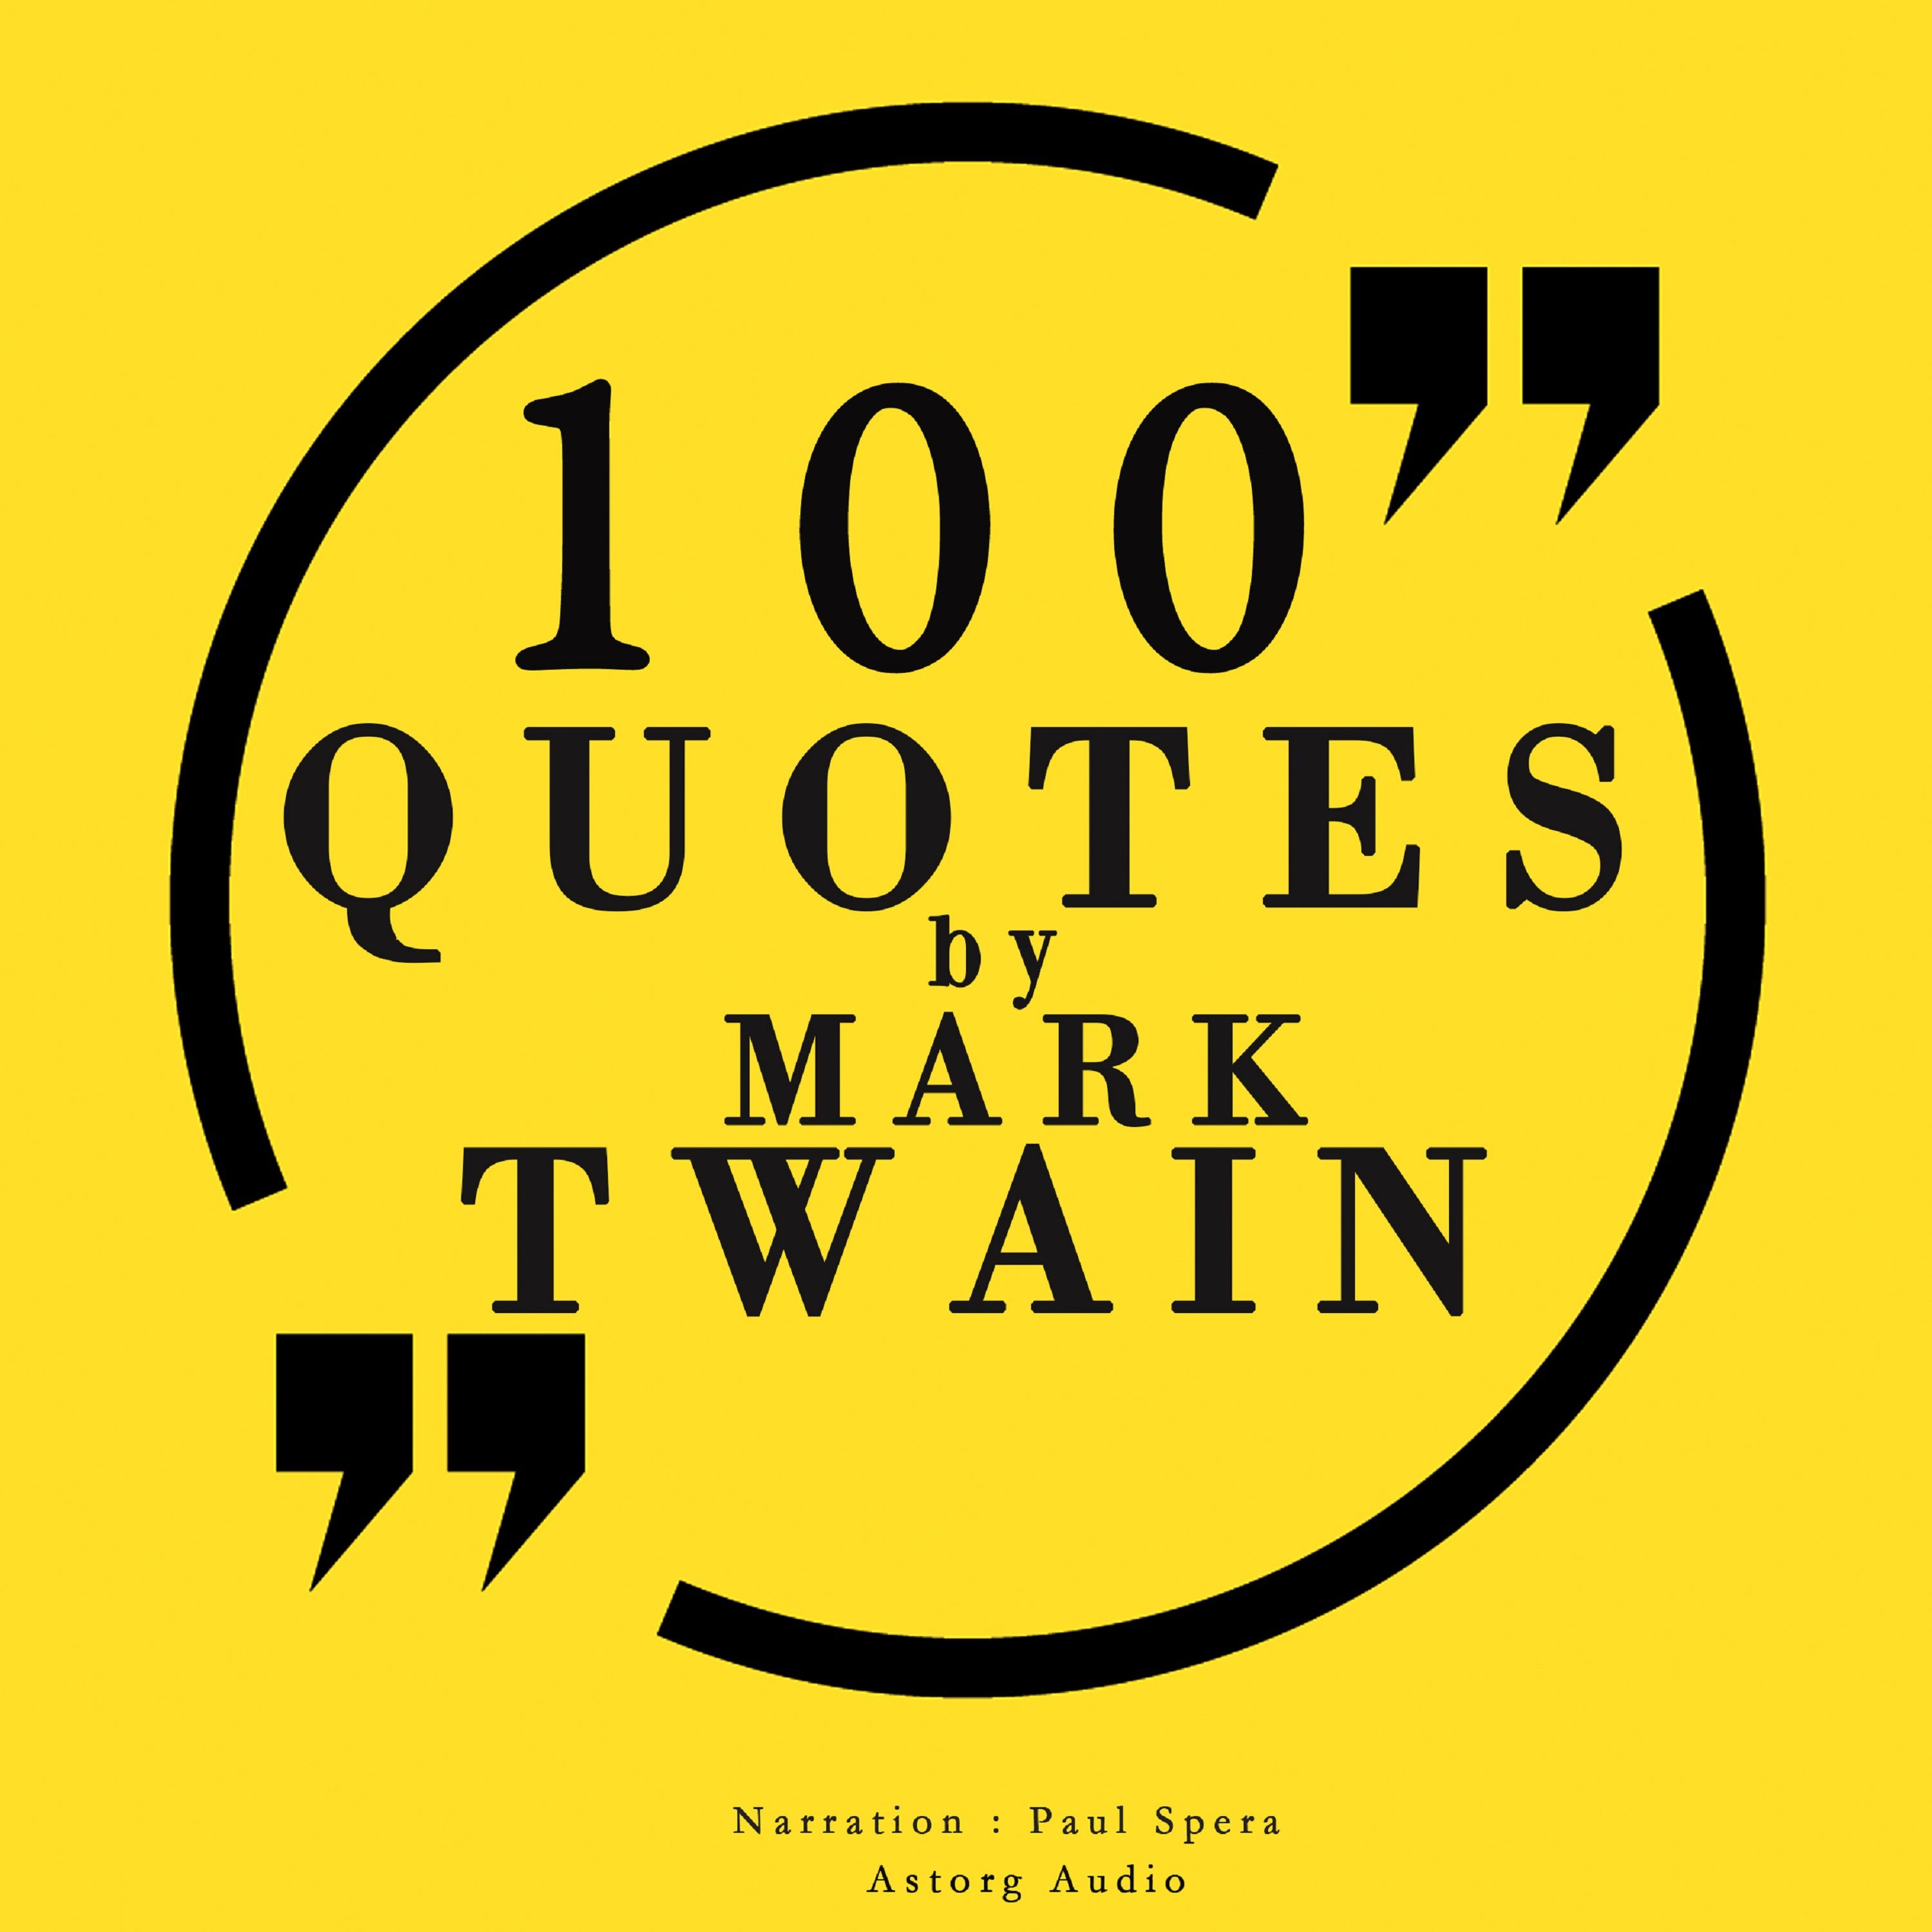 100 Quotes by Mark Twain, audiobook by Mark Twain